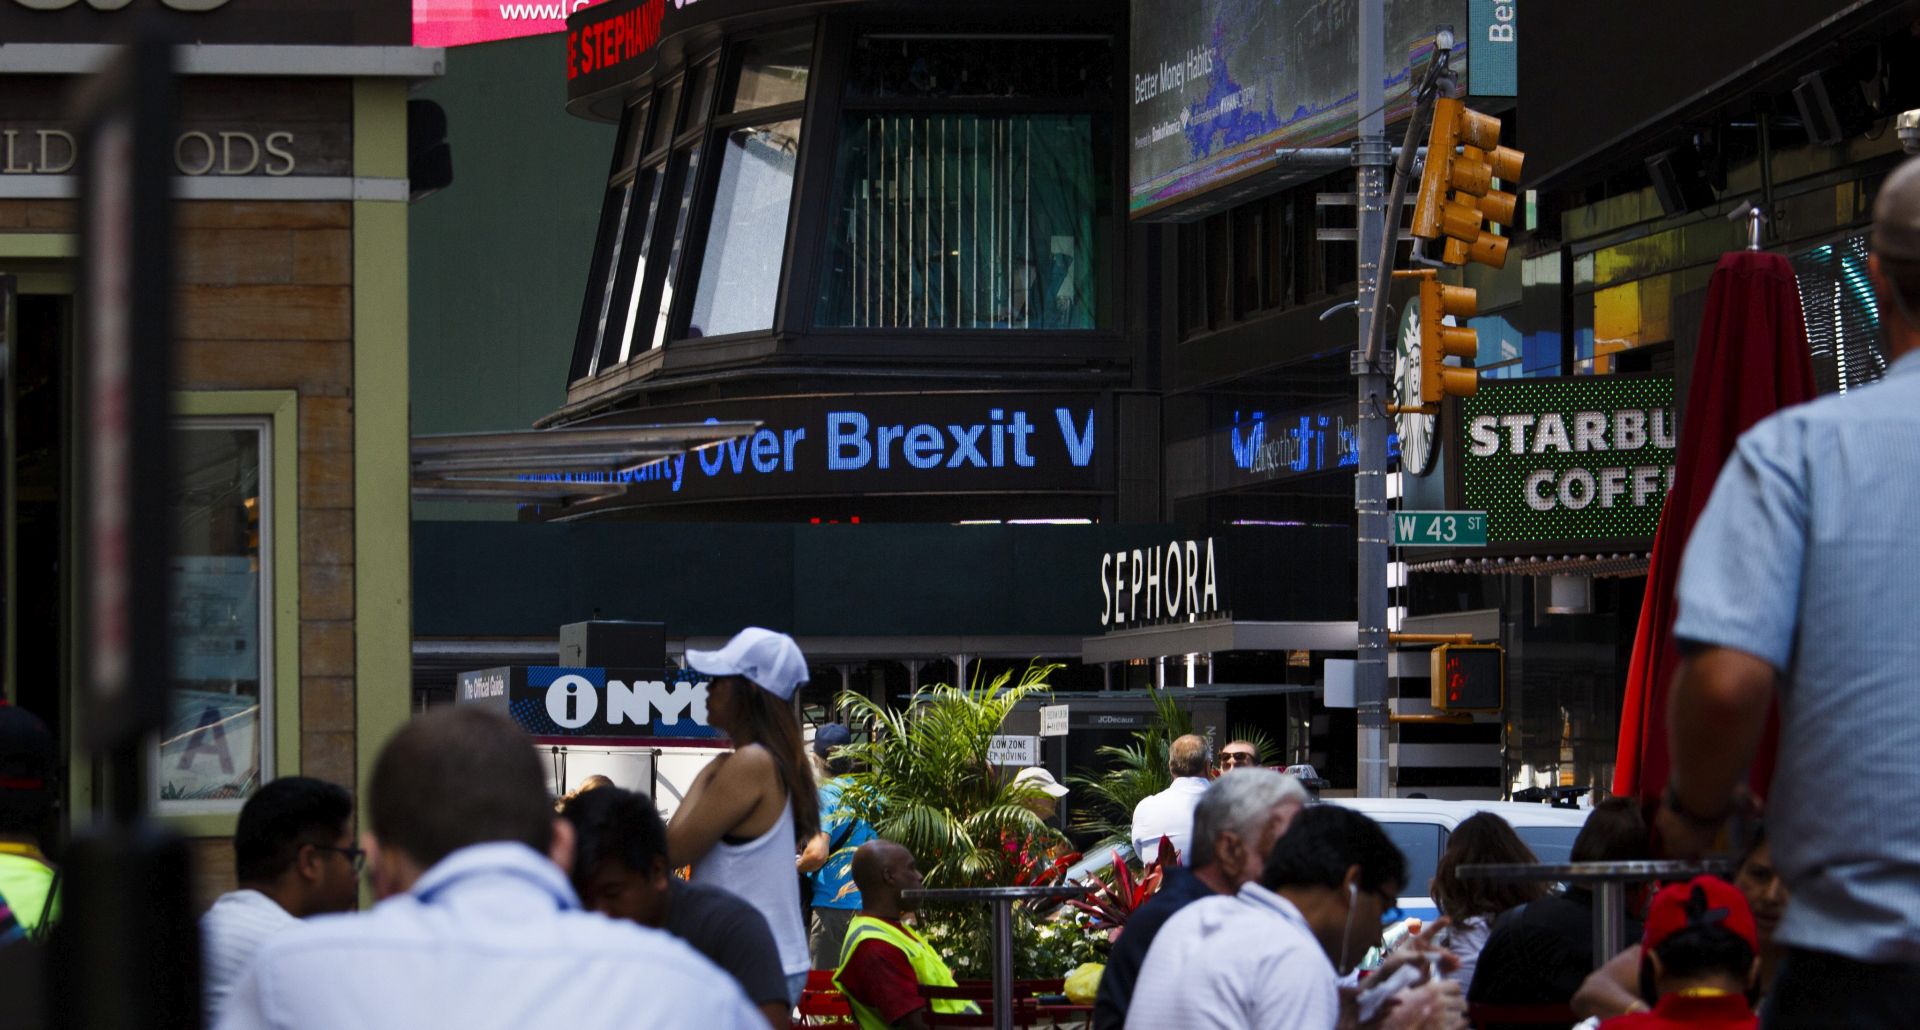 epa05388201 A news ticker in Times Square shows a headline about the 'Brexit' referendum passed in the United Kingdom to leave the European Union in New York, New York, USA, 24 June 2016. Markets were in turmoil over the outcome of 23 June's referendum in Britain on a so-called Brexit with approx 52 percent of the votes in favour to leave the EU.  EPA/JUSTIN LANE